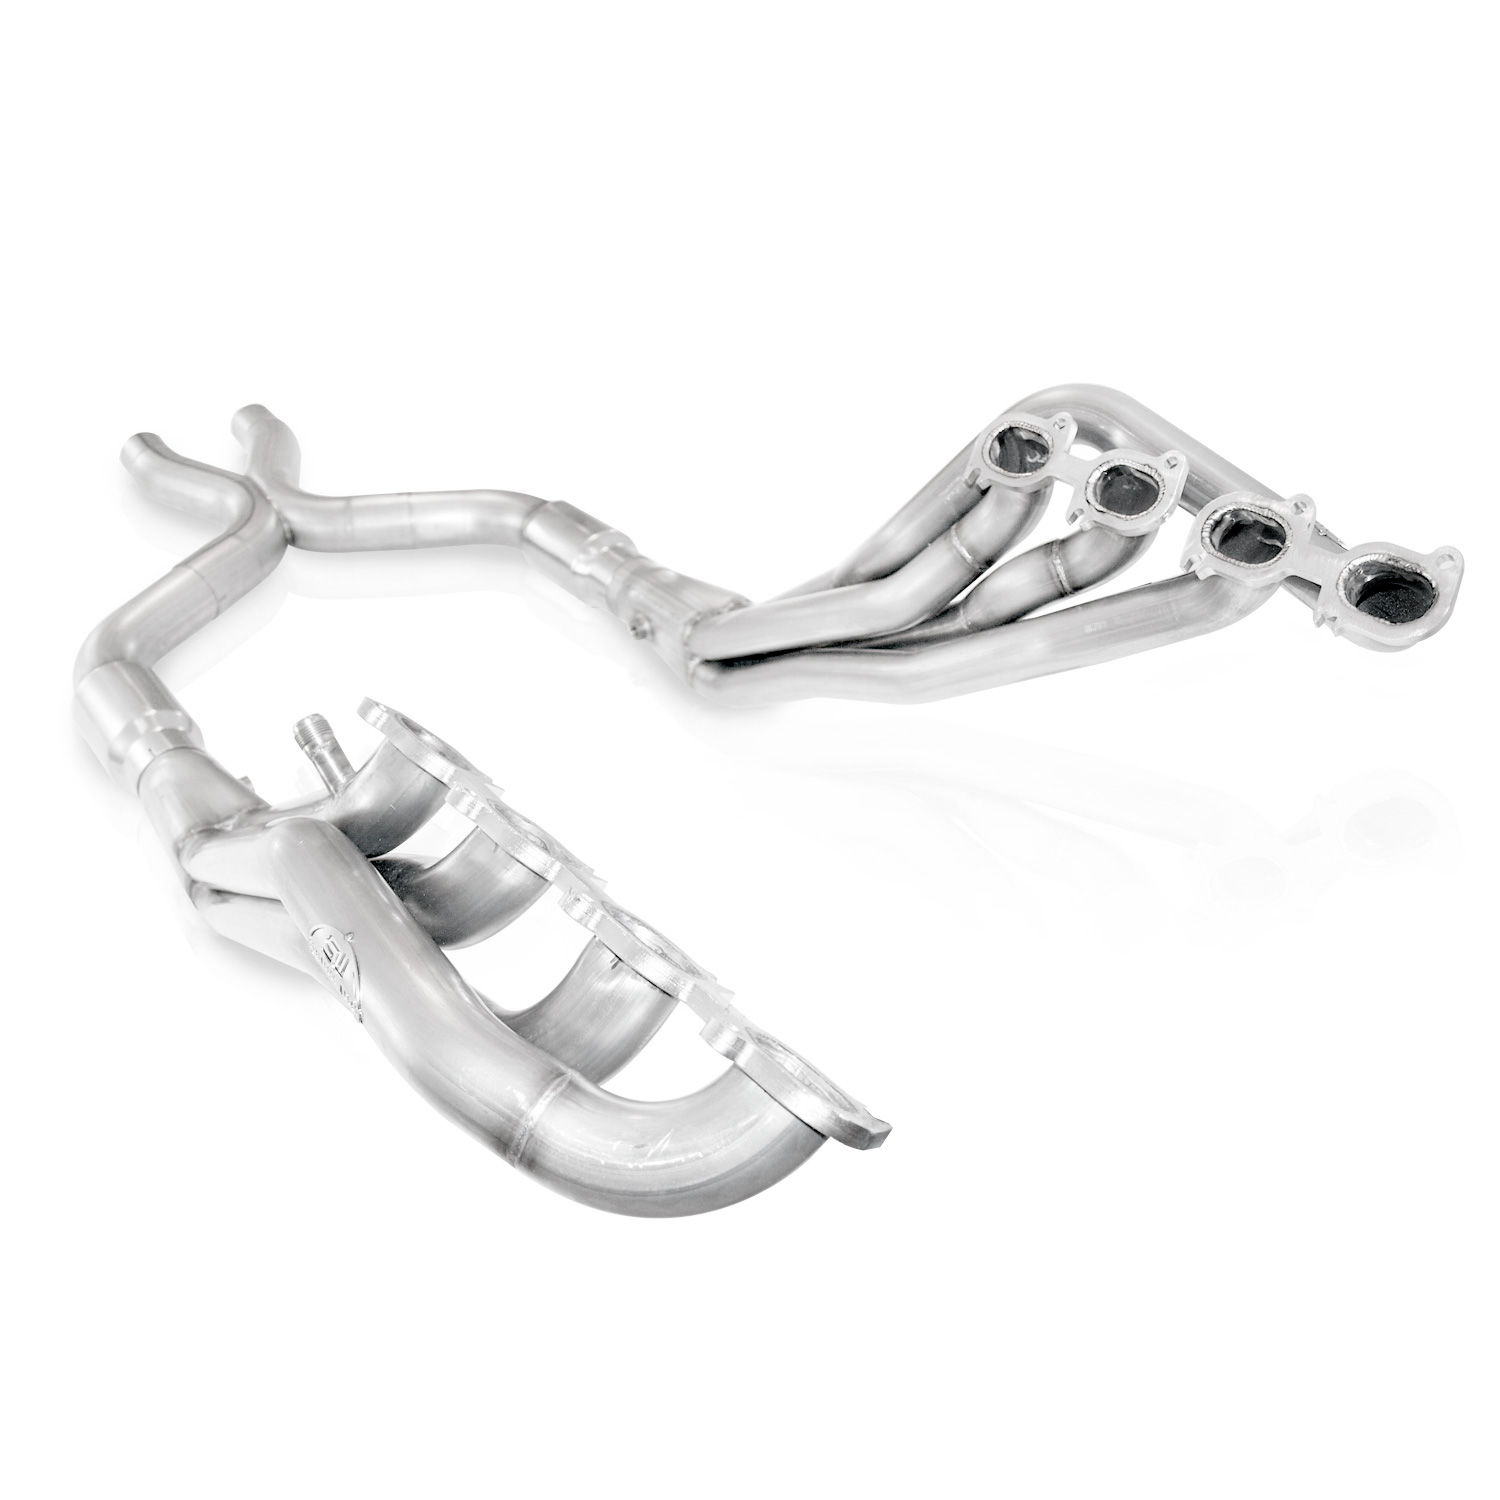 2007-2014 Mustang Shelby GT500 5.4L, 5.8L SW Headers 1-7/8" With Catted Leads Factory & Performance Connect